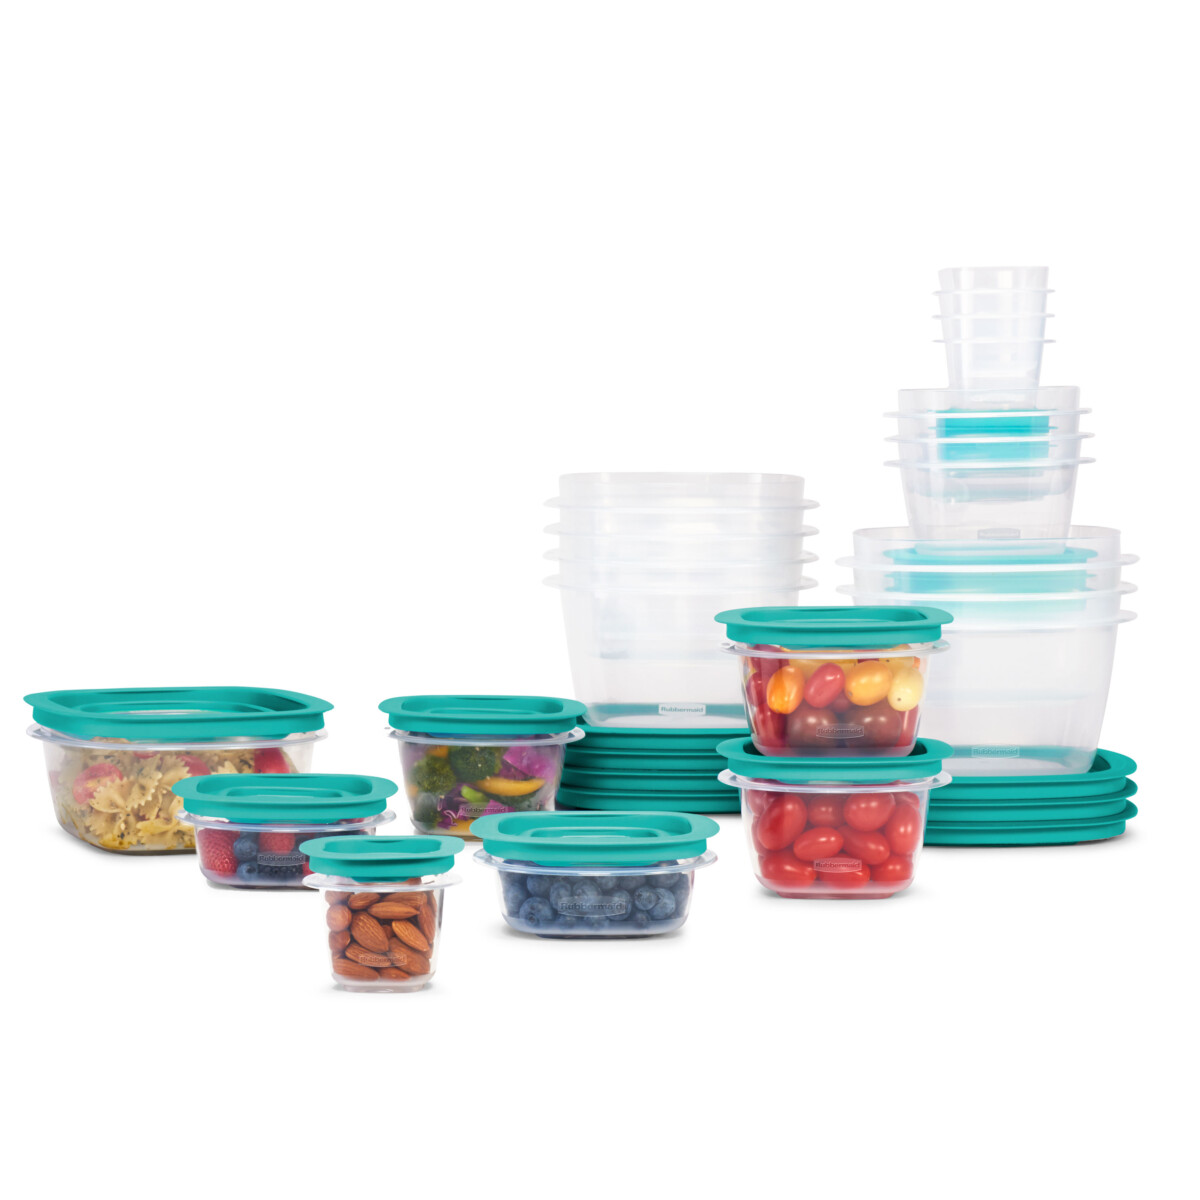 Alea's Deals $19.99 Rubbermaid Press & Lock Easy Find Lids Food Storage Containers, 42-Piece Set at Walmart!  